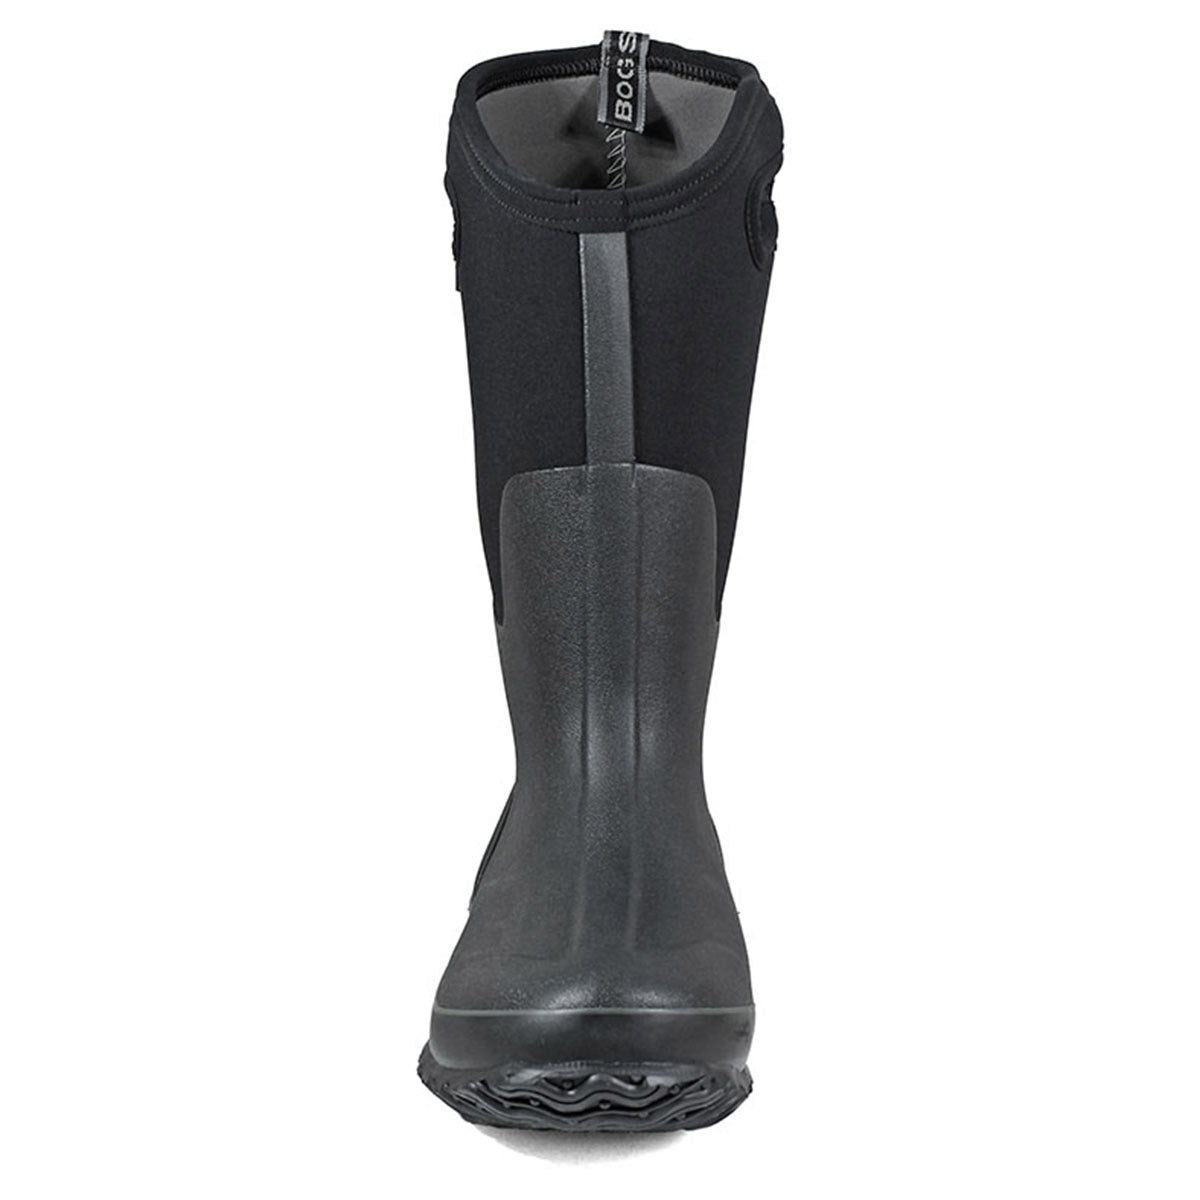 Black neoprene and rubber Bogs Classic Tall boot isolated on a white background.